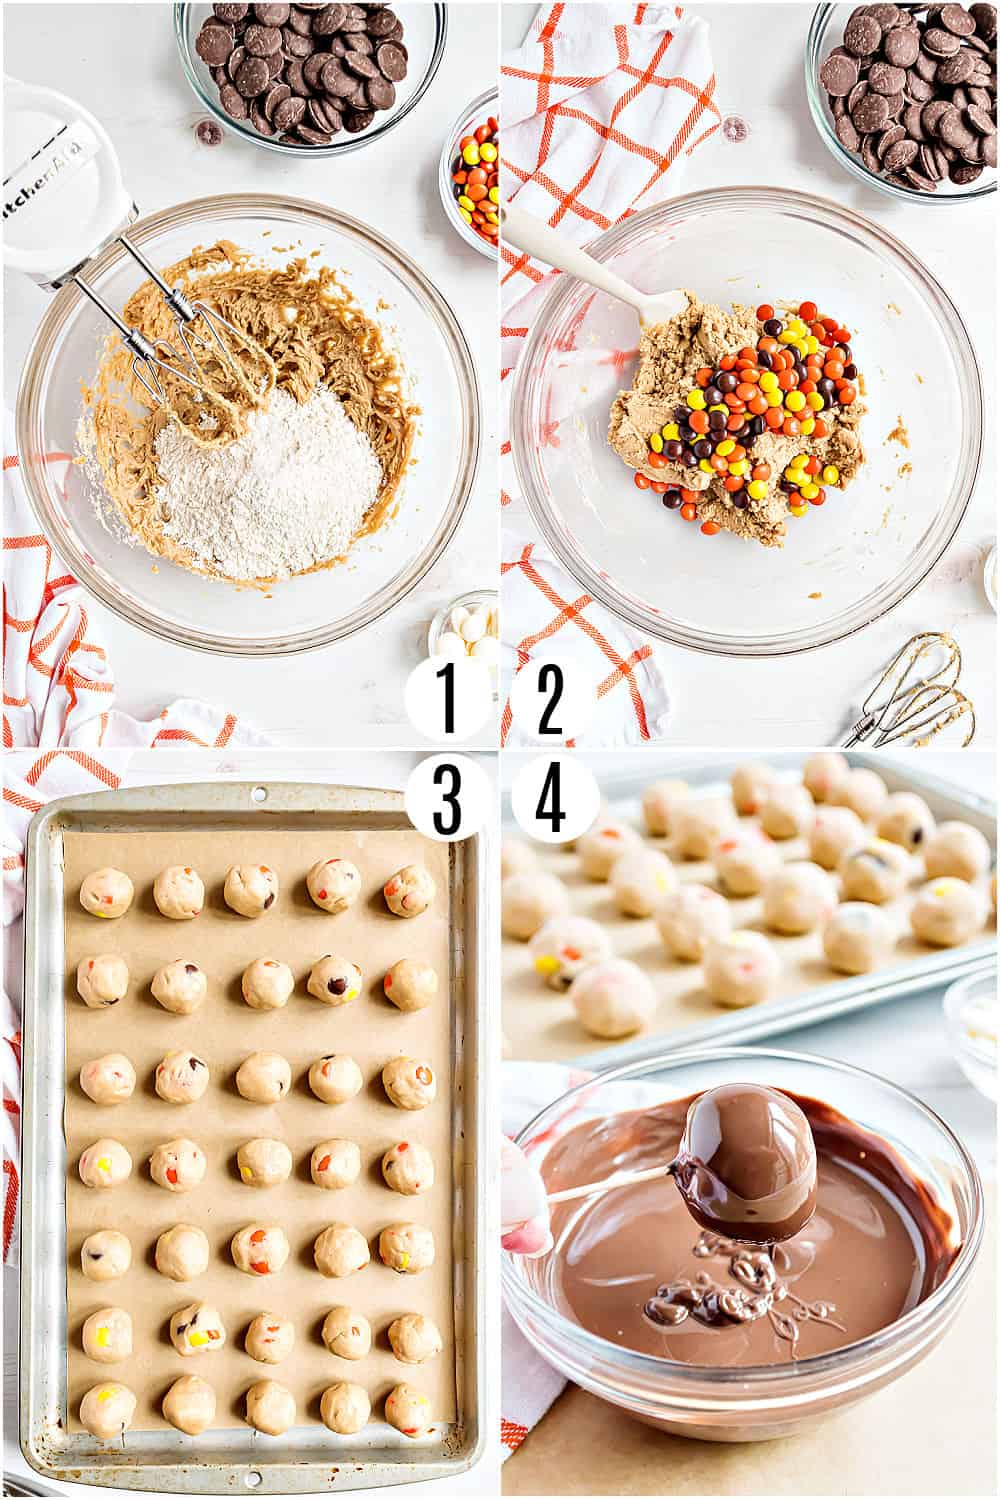 Step by step photos showing how to make peanut butter cookie dough balls.